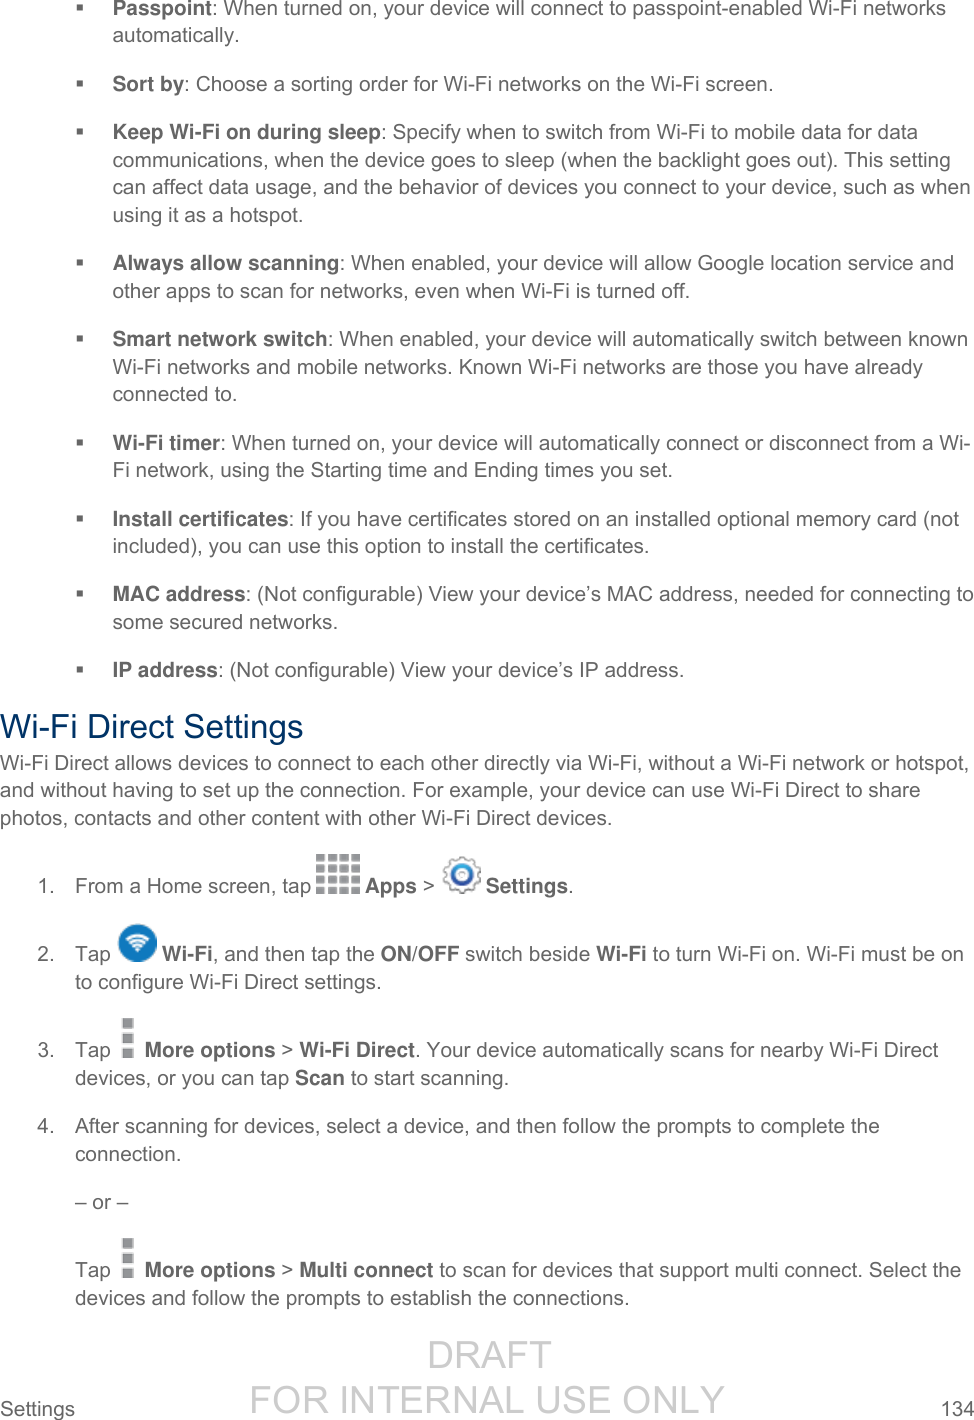                  DRAFT FOR INTERNAL USE ONLY Settings  134    Passpoint: When turned on, your device will connect to passpoint-enabled Wi-Fi networks automatically.  Sort by: Choose a sorting order for Wi-Fi networks on the Wi-Fi screen.  Keep Wi-Fi on during sleep: Specify when to switch from Wi-Fi to mobile data for data communications, when the device goes to sleep (when the backlight goes out). This setting can affect data usage, and the behavior of devices you connect to your device, such as when using it as a hotspot.  Always allow scanning: When enabled, your device will allow Google location service and other apps to scan for networks, even when Wi-Fi is turned off.  Smart network switch: When enabled, your device will automatically switch between known Wi-Fi networks and mobile networks. Known Wi-Fi networks are those you have already connected to.  Wi-Fi timer: When turned on, your device will automatically connect or disconnect from a Wi-Fi network, using the Starting time and Ending times you set.  Install certificates: If you have certificates stored on an installed optional memory card (not included), you can use this option to install the certificates.  MAC address: (Not configurable) View your device’s MAC address, needed for connecting to some secured networks.  IP address: (Not configurable) View your device’s IP address. Wi-Fi Direct Settings Wi-Fi Direct allows devices to connect to each other directly via Wi-Fi, without a Wi-Fi network or hotspot, and without having to set up the connection. For example, your device can use Wi-Fi Direct to share photos, contacts and other content with other Wi-Fi Direct devices. 1.  From a Home screen, tap   Apps &gt;   Settings.  2.  Tap   Wi-Fi, and then tap the ON/OFF switch beside Wi-Fi to turn Wi-Fi on. Wi-Fi must be on to configure Wi-Fi Direct settings. 3.  Tap   More options &gt; Wi-Fi Direct. Your device automatically scans for nearby Wi-Fi Direct devices, or you can tap Scan to start scanning. 4.  After scanning for devices, select a device, and then follow the prompts to complete the connection. – or – Tap   More options &gt; Multi connect to scan for devices that support multi connect. Select the devices and follow the prompts to establish the connections. 